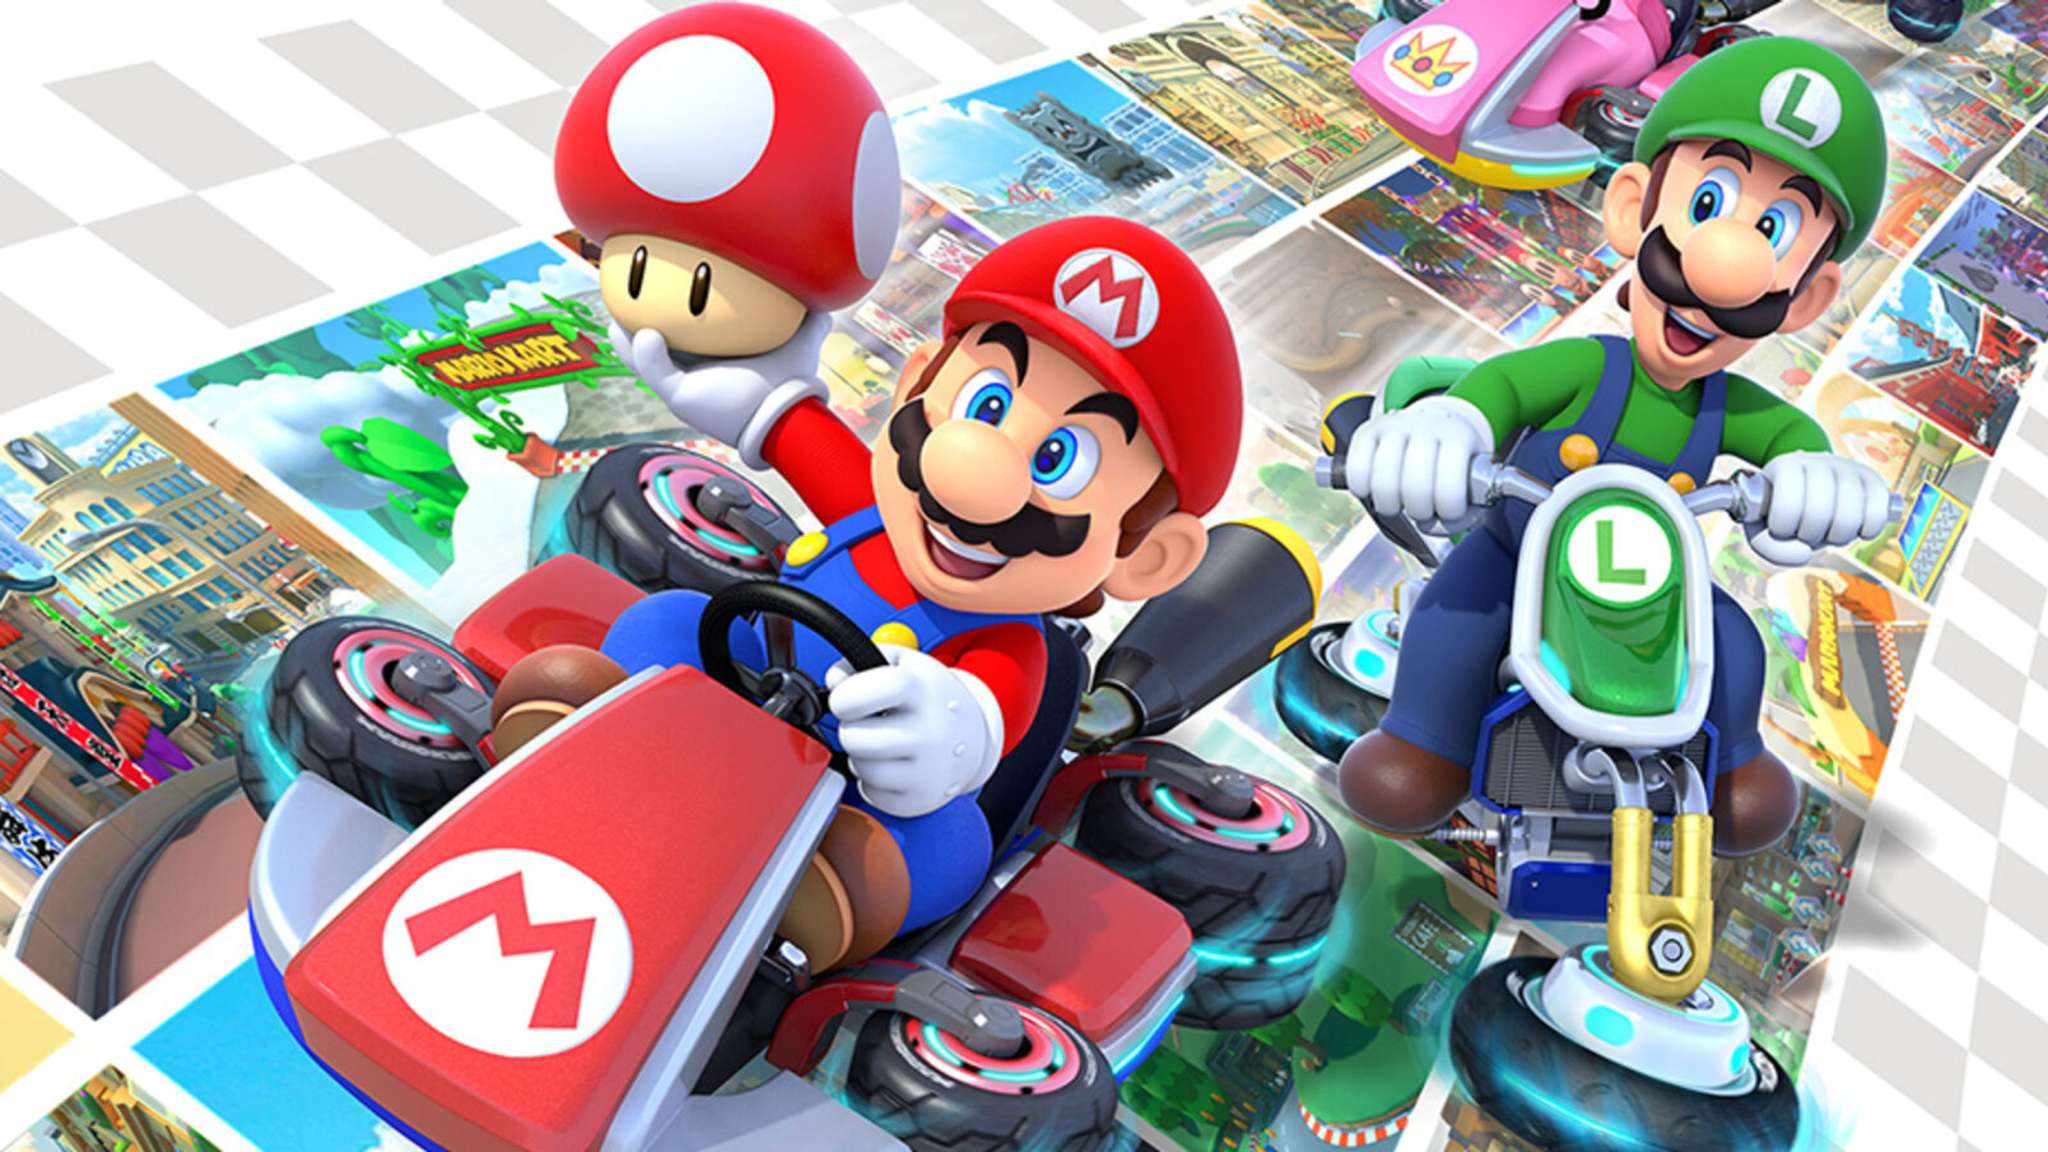 Mario Kart 8 Deluxe Datamine Tracks From DLC Wave 3 Are Revealed By A ...